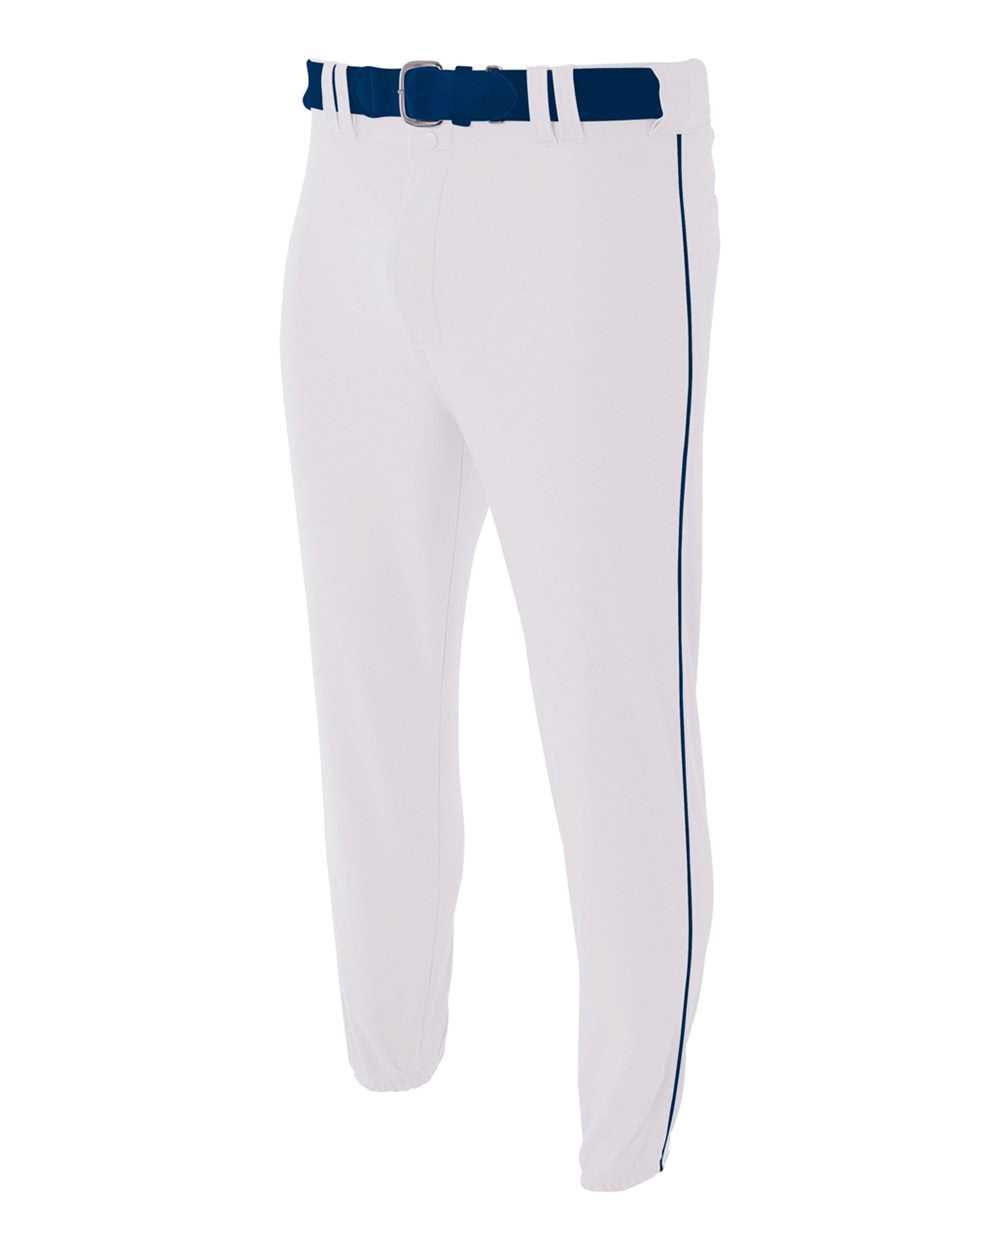 A4 NB6178 Youth Pro Style Elastic Bottom Baseball Pant - White Navy - HIT a Double